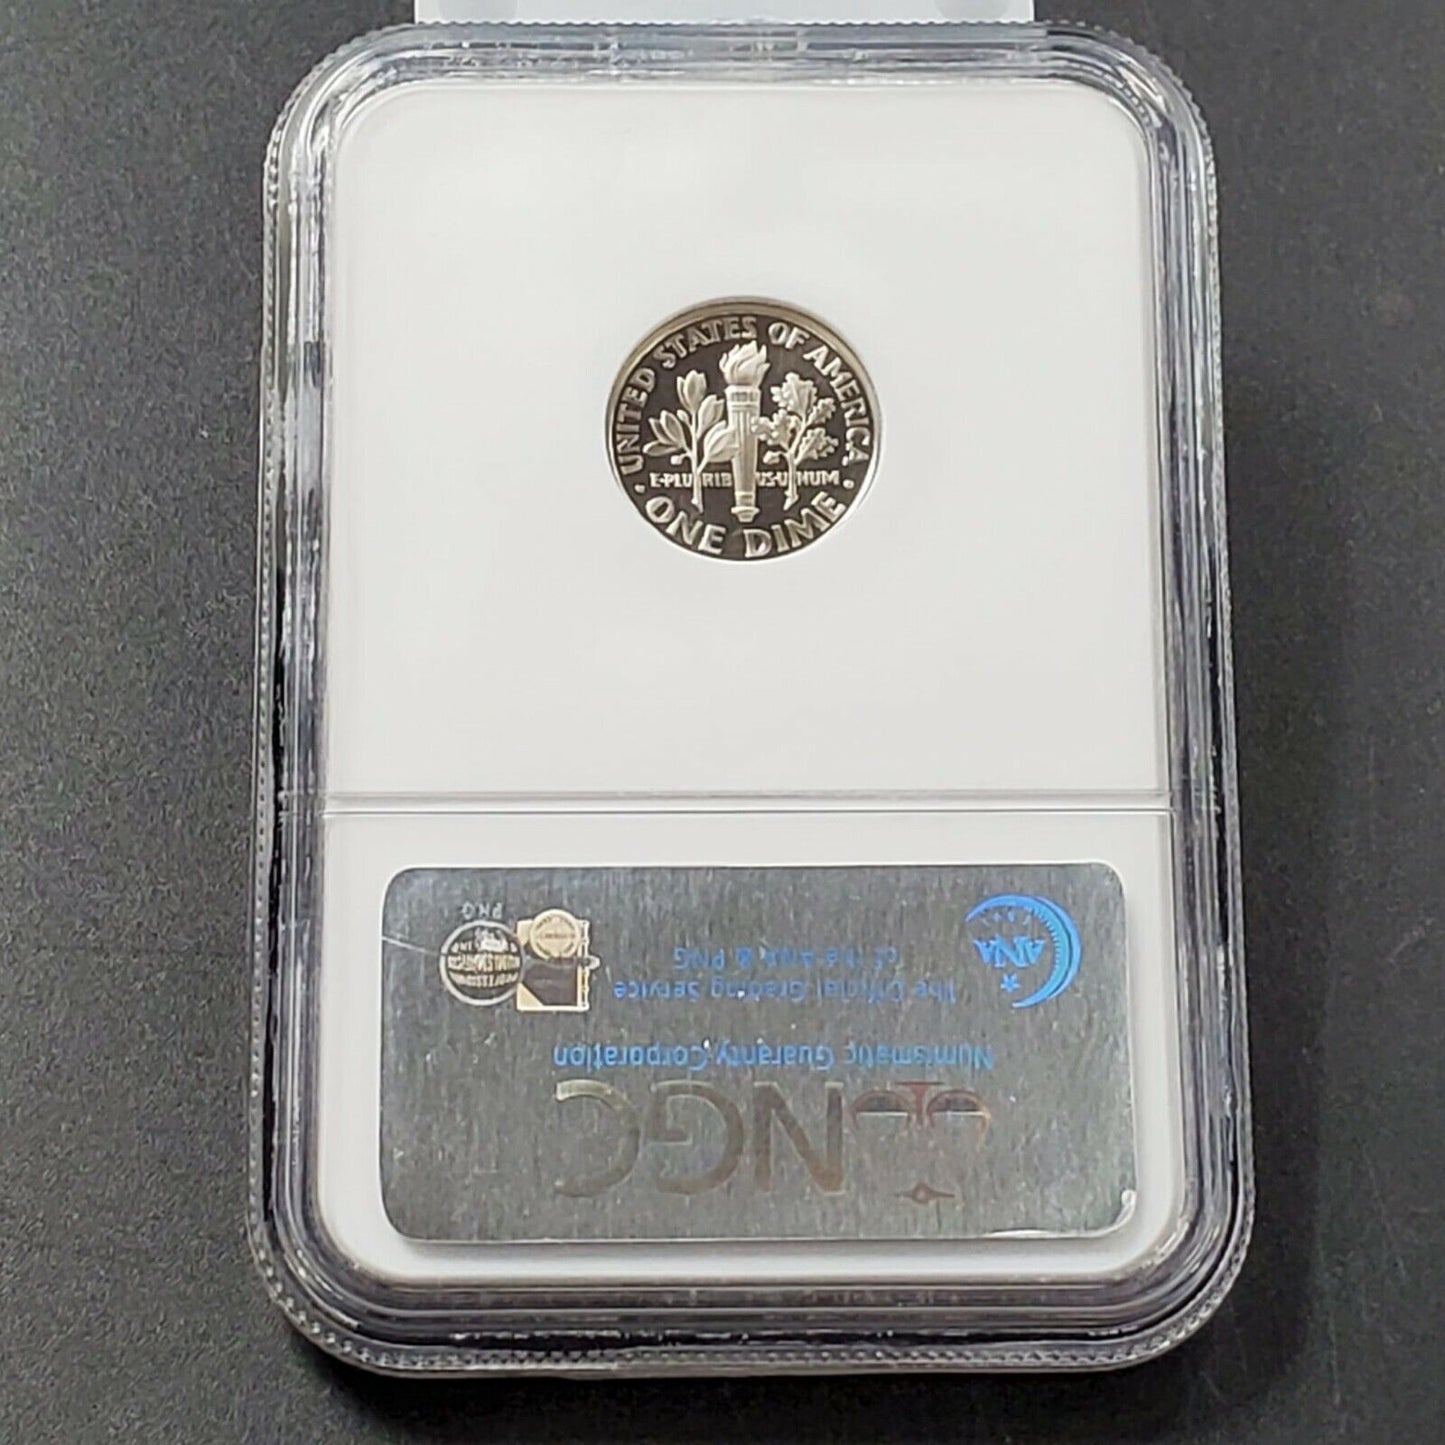 2005 S Roosevelt CLAD Dime Coin NGC PF70 DCAM UCAM Combined Ship Discounts #2